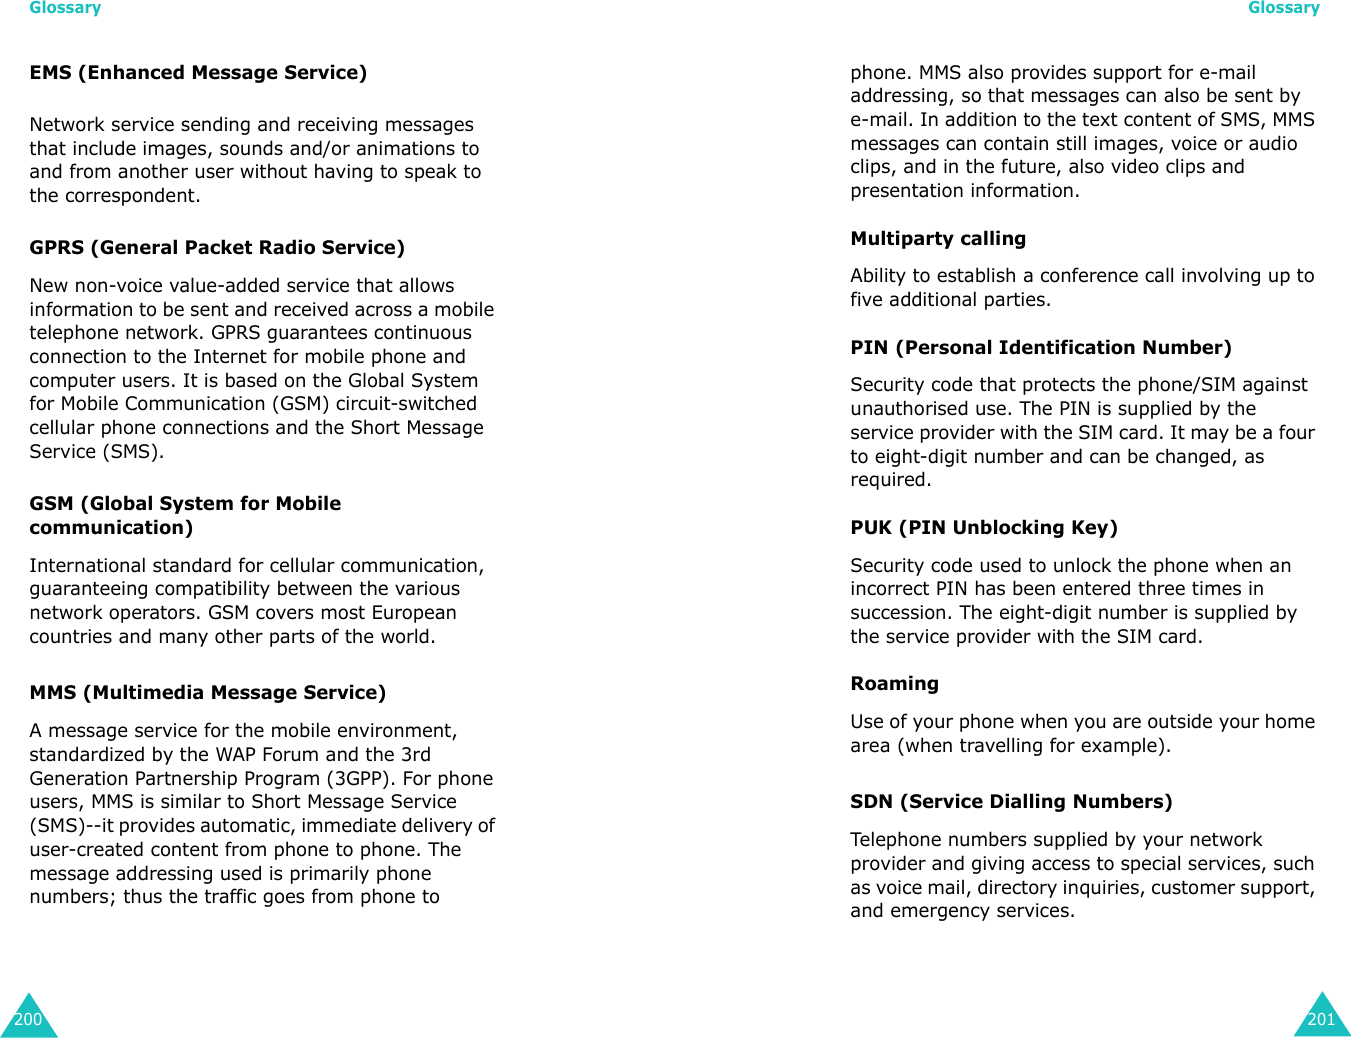 Glossary200EMS (Enhanced Message Service)Network service sending and receiving messages that include images, sounds and/or animations to and from another user without having to speak to the correspondent.GPRS (General Packet Radio Service)New non-voice value-added service that allows information to be sent and received across a mobile telephone network. GPRS guarantees continuous connection to the Internet for mobile phone and computer users. It is based on the Global System for Mobile Communication (GSM) circuit-switched cellular phone connections and the Short Message Service (SMS).GSM (Global System for Mobile communication)International standard for cellular communication, guaranteeing compatibility between the various network operators. GSM covers most European countries and many other parts of the world.MMS (Multimedia Message Service)A message service for the mobile environment, standardized by the WAP Forum and the 3rd Generation Partnership Program (3GPP). For phone users, MMS is similar to Short Message Service (SMS)--it provides automatic, immediate delivery of user-created content from phone to phone. The message addressing used is primarily phone numbers; thus the traffic goes from phone to Glossary201phone. MMS also provides support for e-mail addressing, so that messages can also be sent by e-mail. In addition to the text content of SMS, MMS messages can contain still images, voice or audio clips, and in the future, also video clips and presentation information.Multiparty callingAbility to establish a conference call involving up to five additional parties.PIN (Personal Identification Number)Security code that protects the phone/SIM against unauthorised use. The PIN is supplied by the service provider with the SIM card. It may be a four to eight-digit number and can be changed, as required.PUK (PIN Unblocking Key)Security code used to unlock the phone when an incorrect PIN has been entered three times in succession. The eight-digit number is supplied by the service provider with the SIM card.RoamingUse of your phone when you are outside your home area (when travelling for example).SDN (Service Dialling Numbers)Telephone numbers supplied by your network provider and giving access to special services, such as voice mail, directory inquiries, customer support, and emergency services.